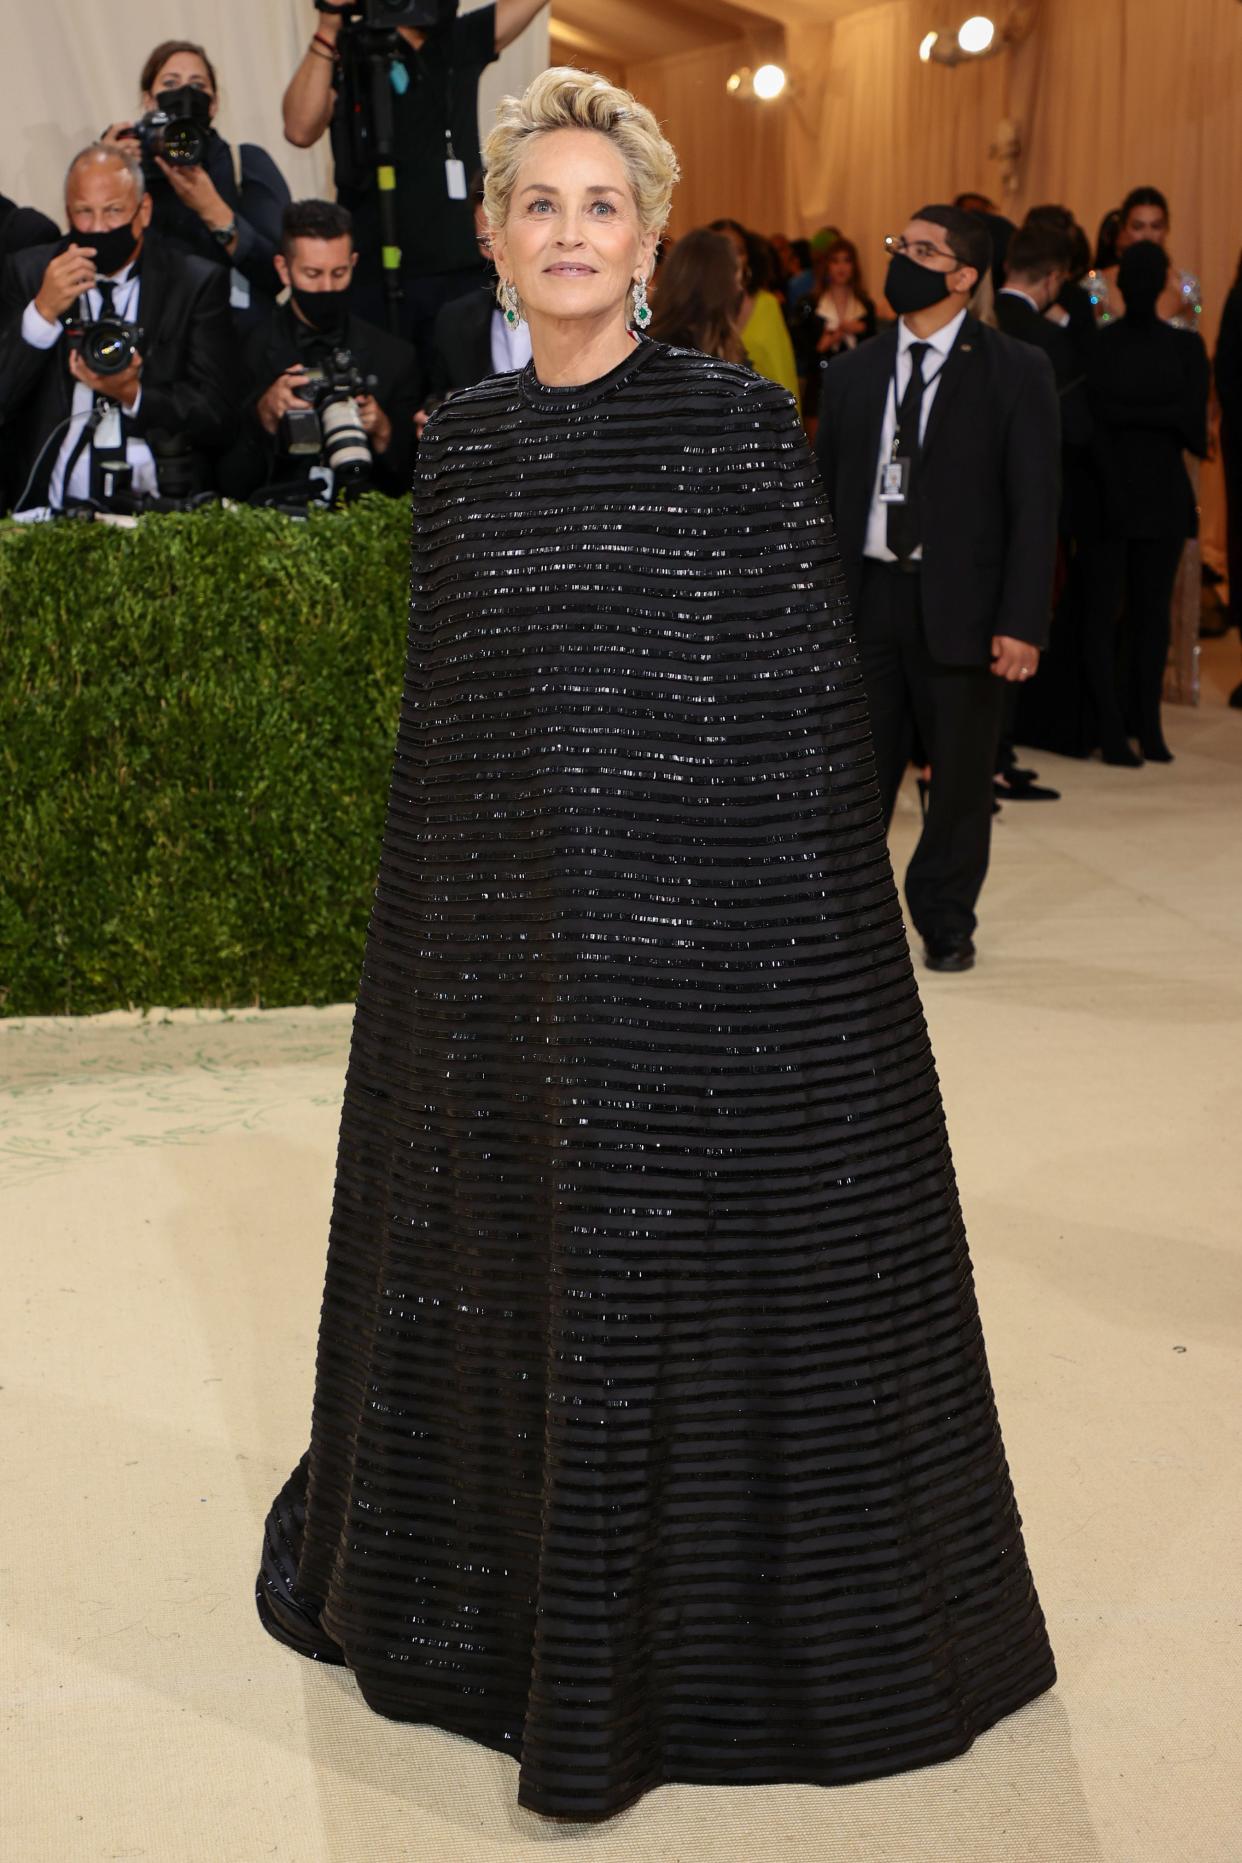 Sharon Stone attends The 2021 Met Gala Celebrating In America: A Lexicon Of Fashion at Metropolitan Museum of Art on Sept. 13, 2021 in New York.